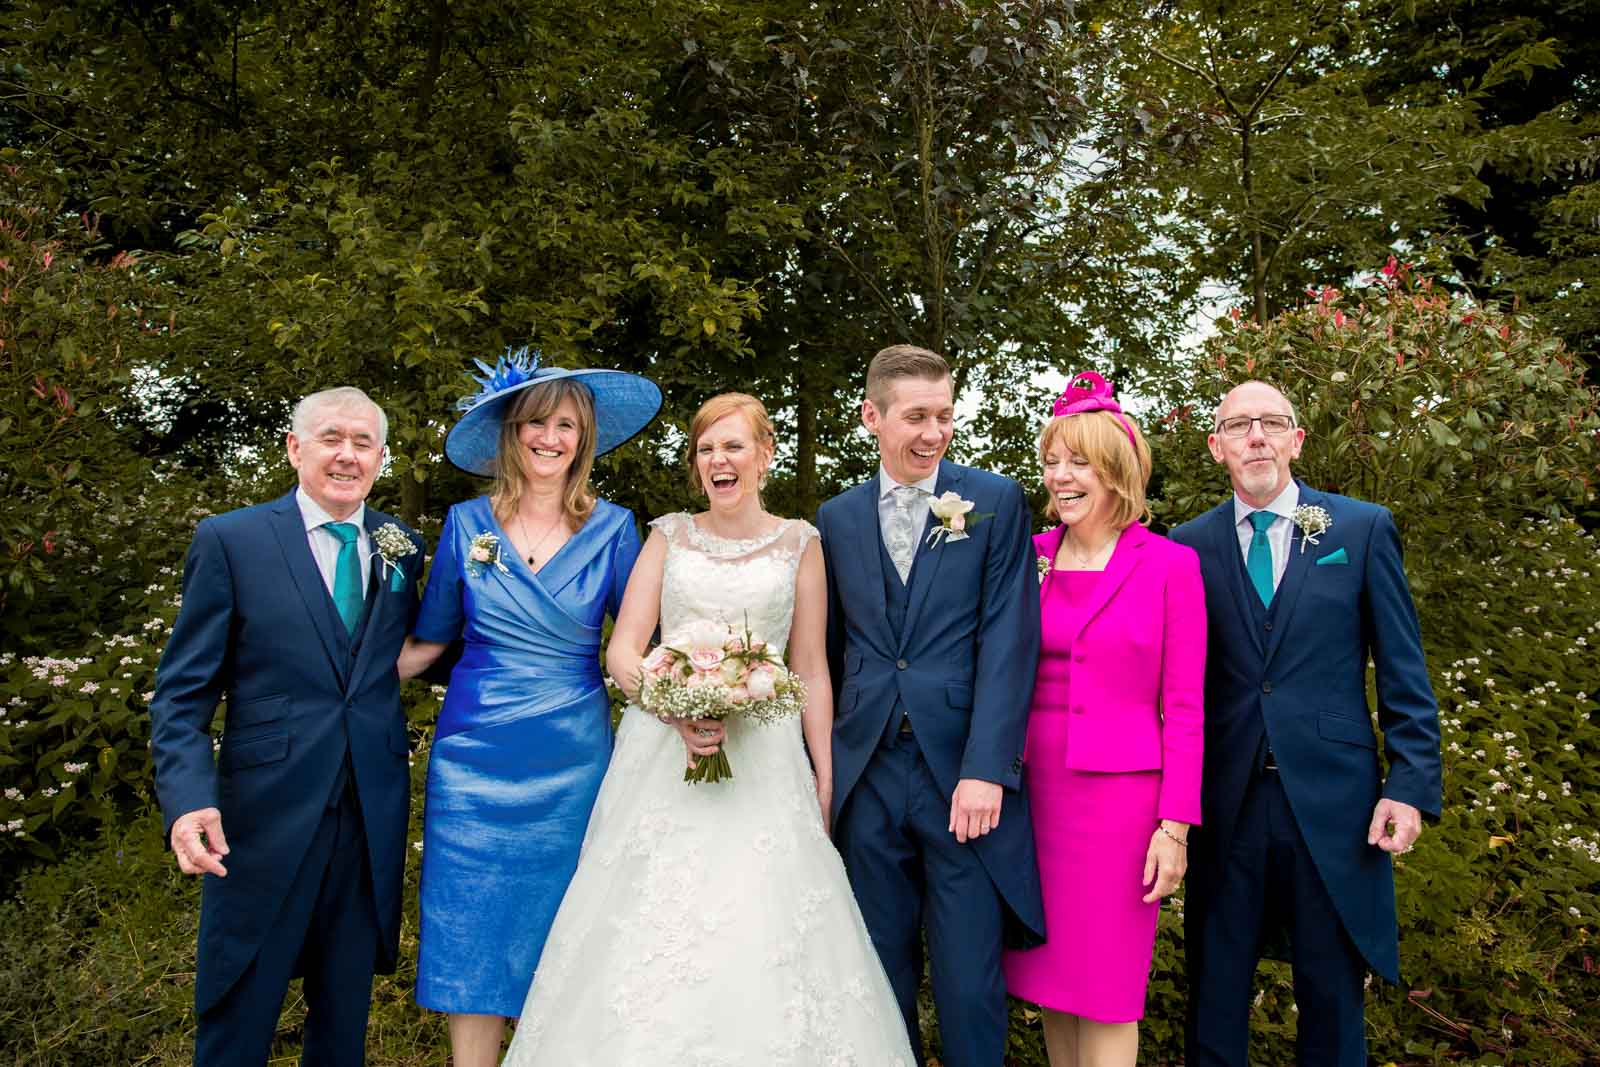 group photos of the family at styal lodge wedding venue during a wedding day